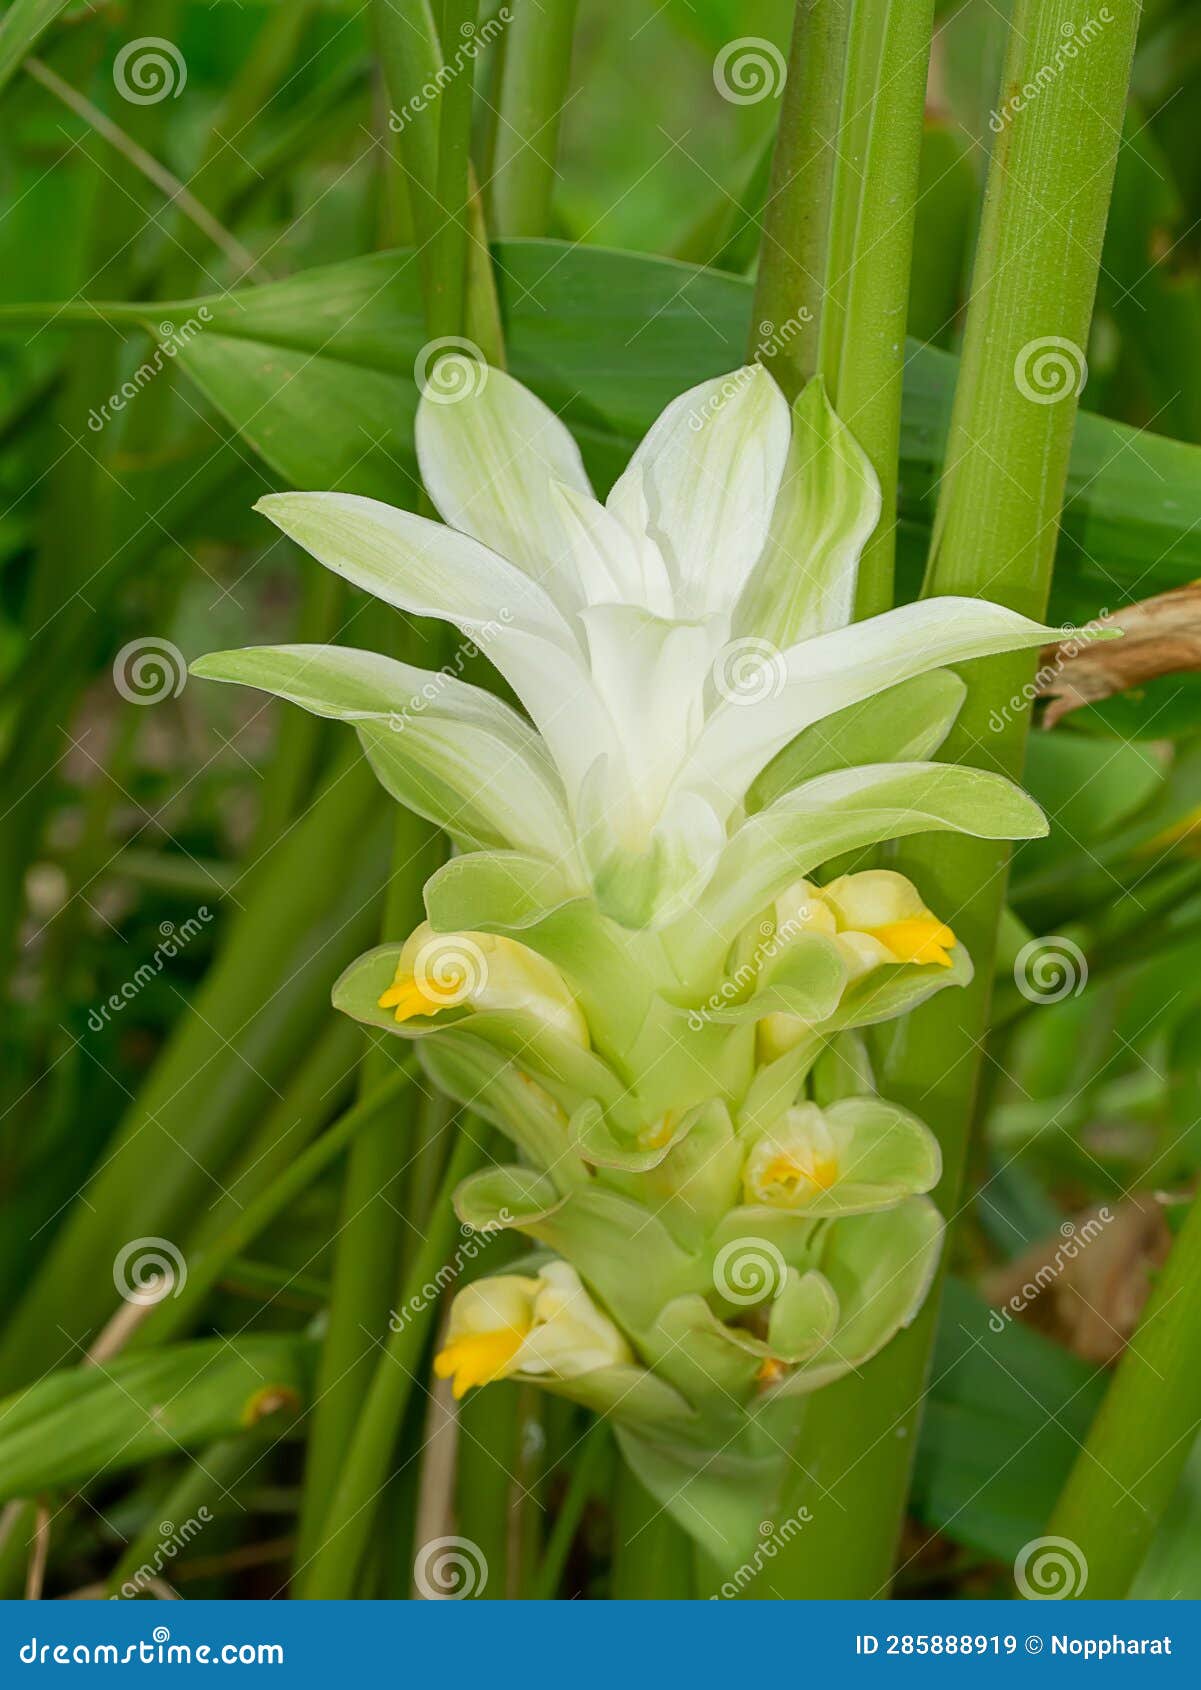 close up turmaric flower with blur background